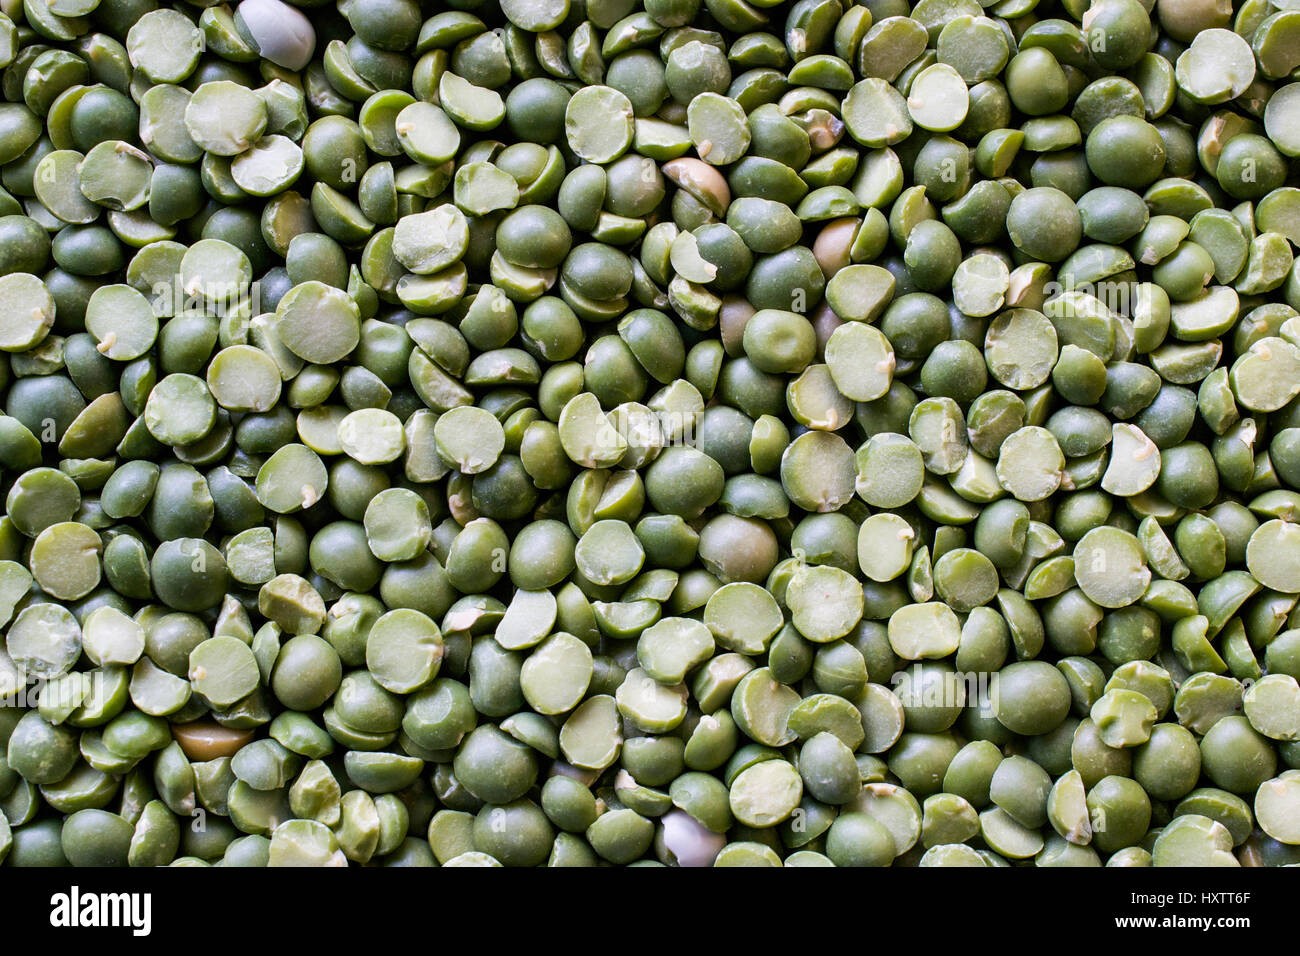 Unsorted green split peas background showing some broken, dried  and damaged peas that need to be weeded out before consuming - texture and background Stock Photo